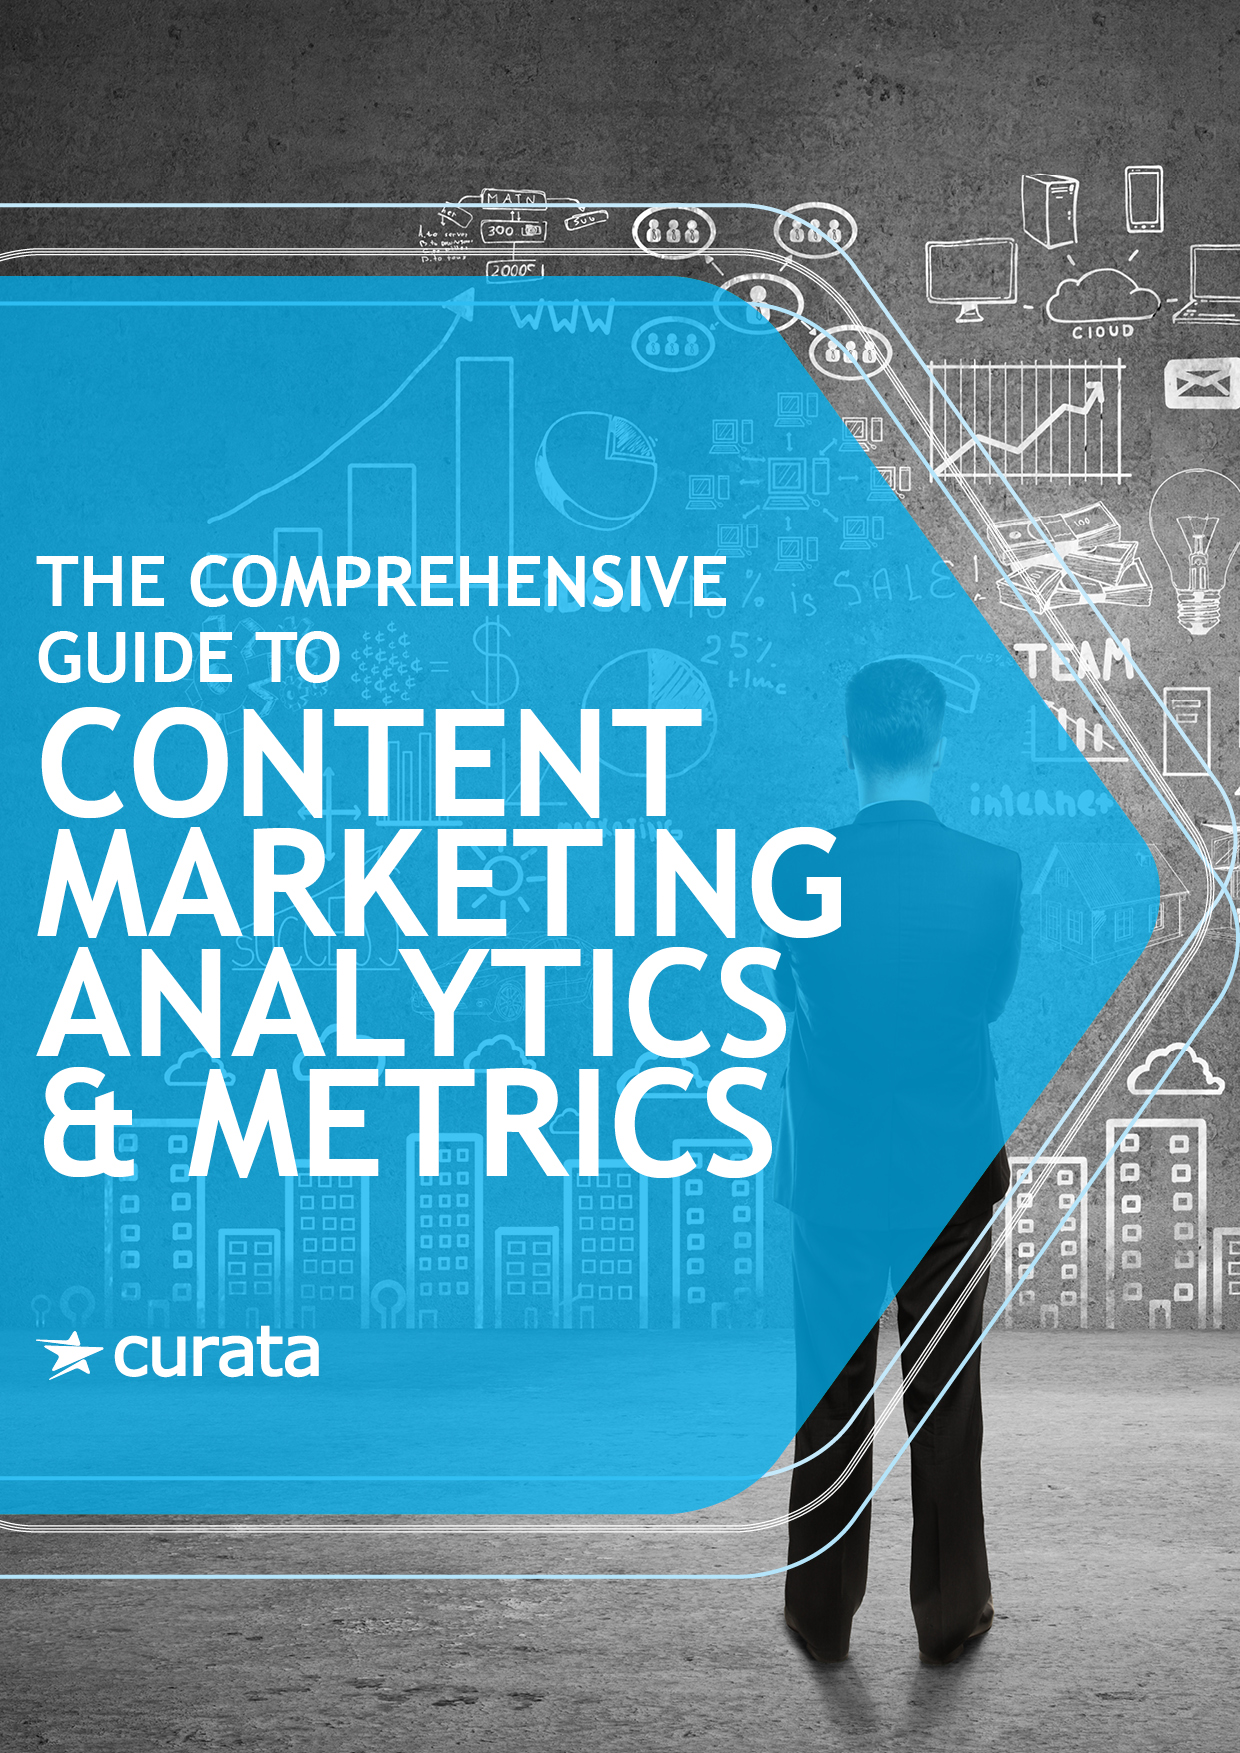 The Comprehensive Guide to Content Marketing Analytics & Metrics